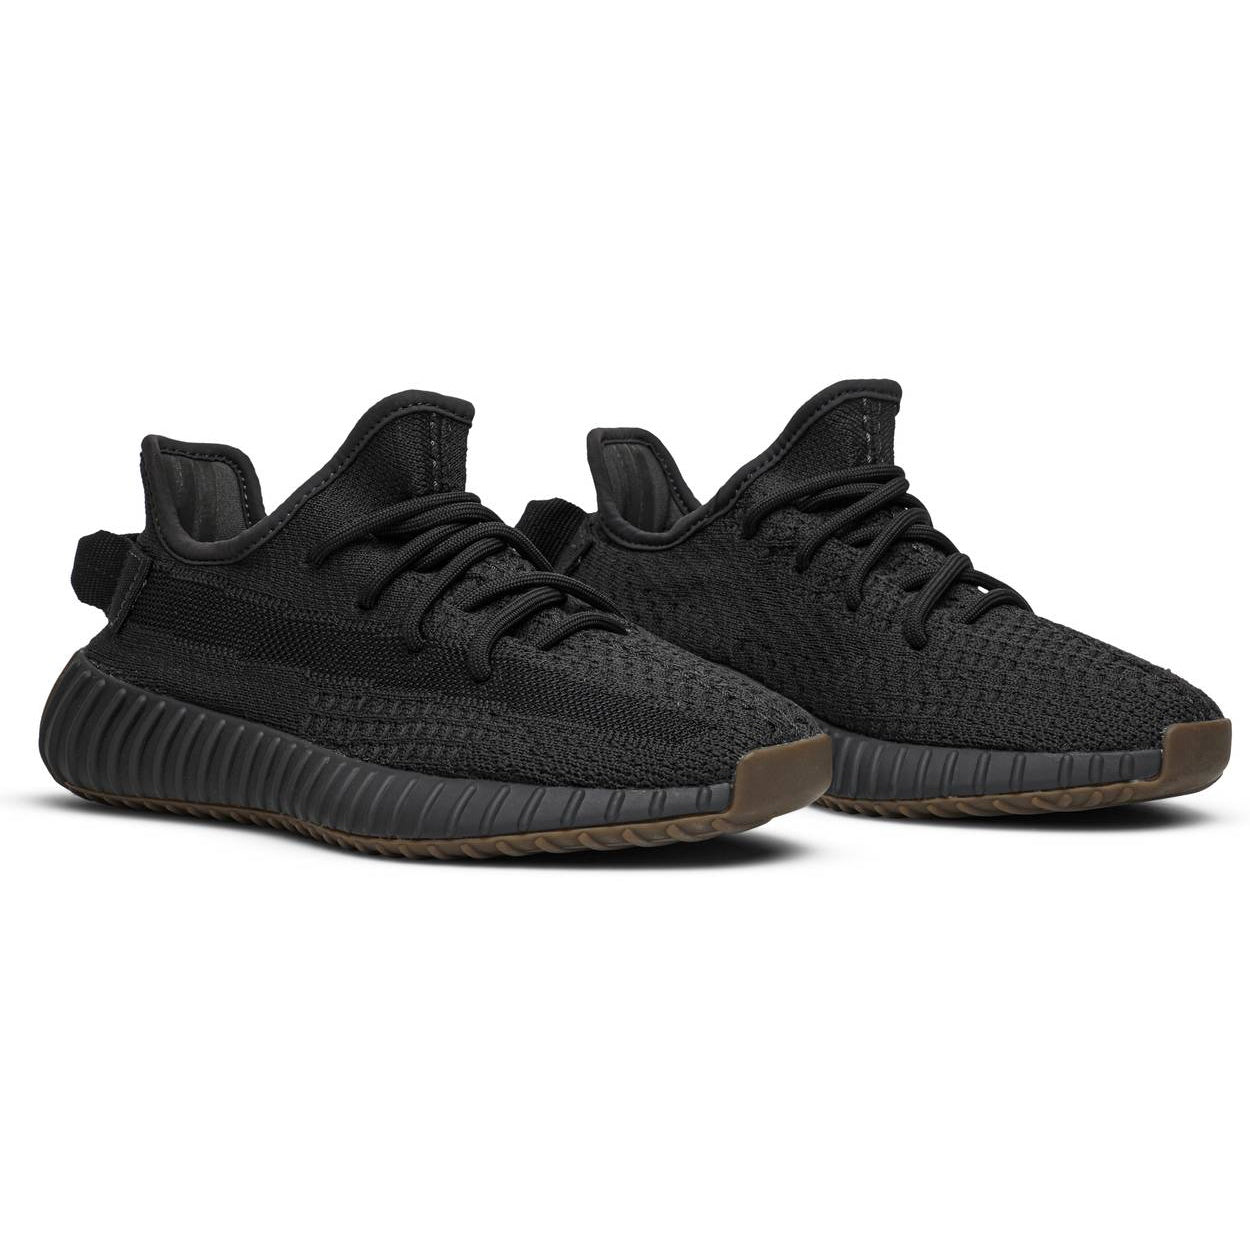 adidas Yeezy Boost 350 V2 'Cinder Non-Reflective' - After Burn